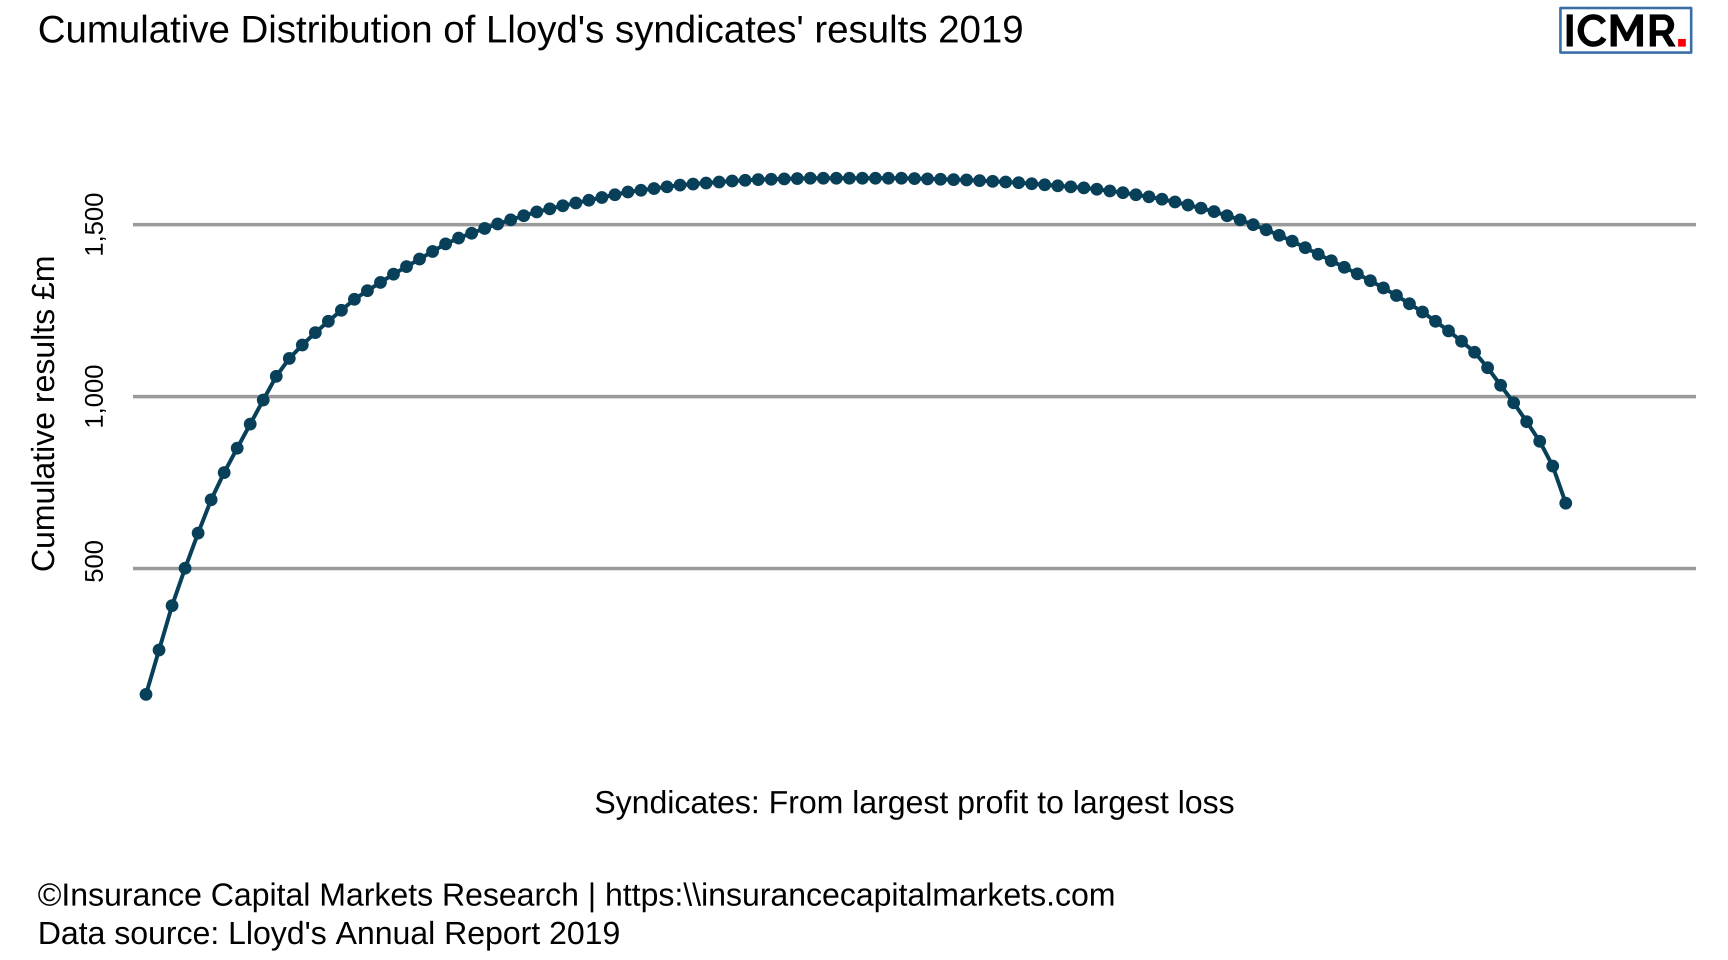 Whale chart of Lloyd's results, showing the cumulative results from the most profitable to the most loss making syndicate